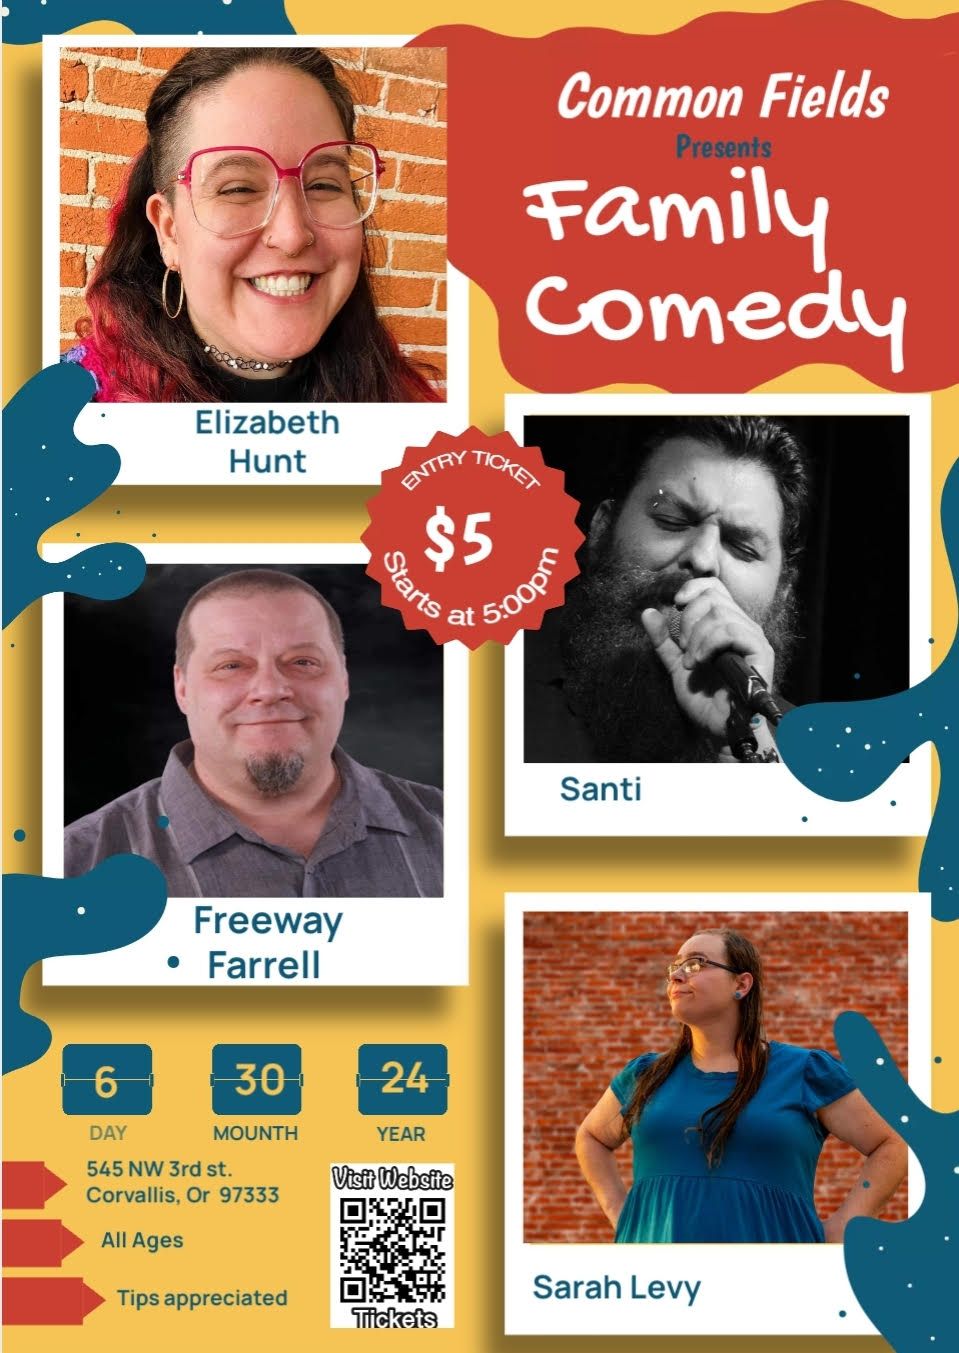 Family comedy night @ Common Fields